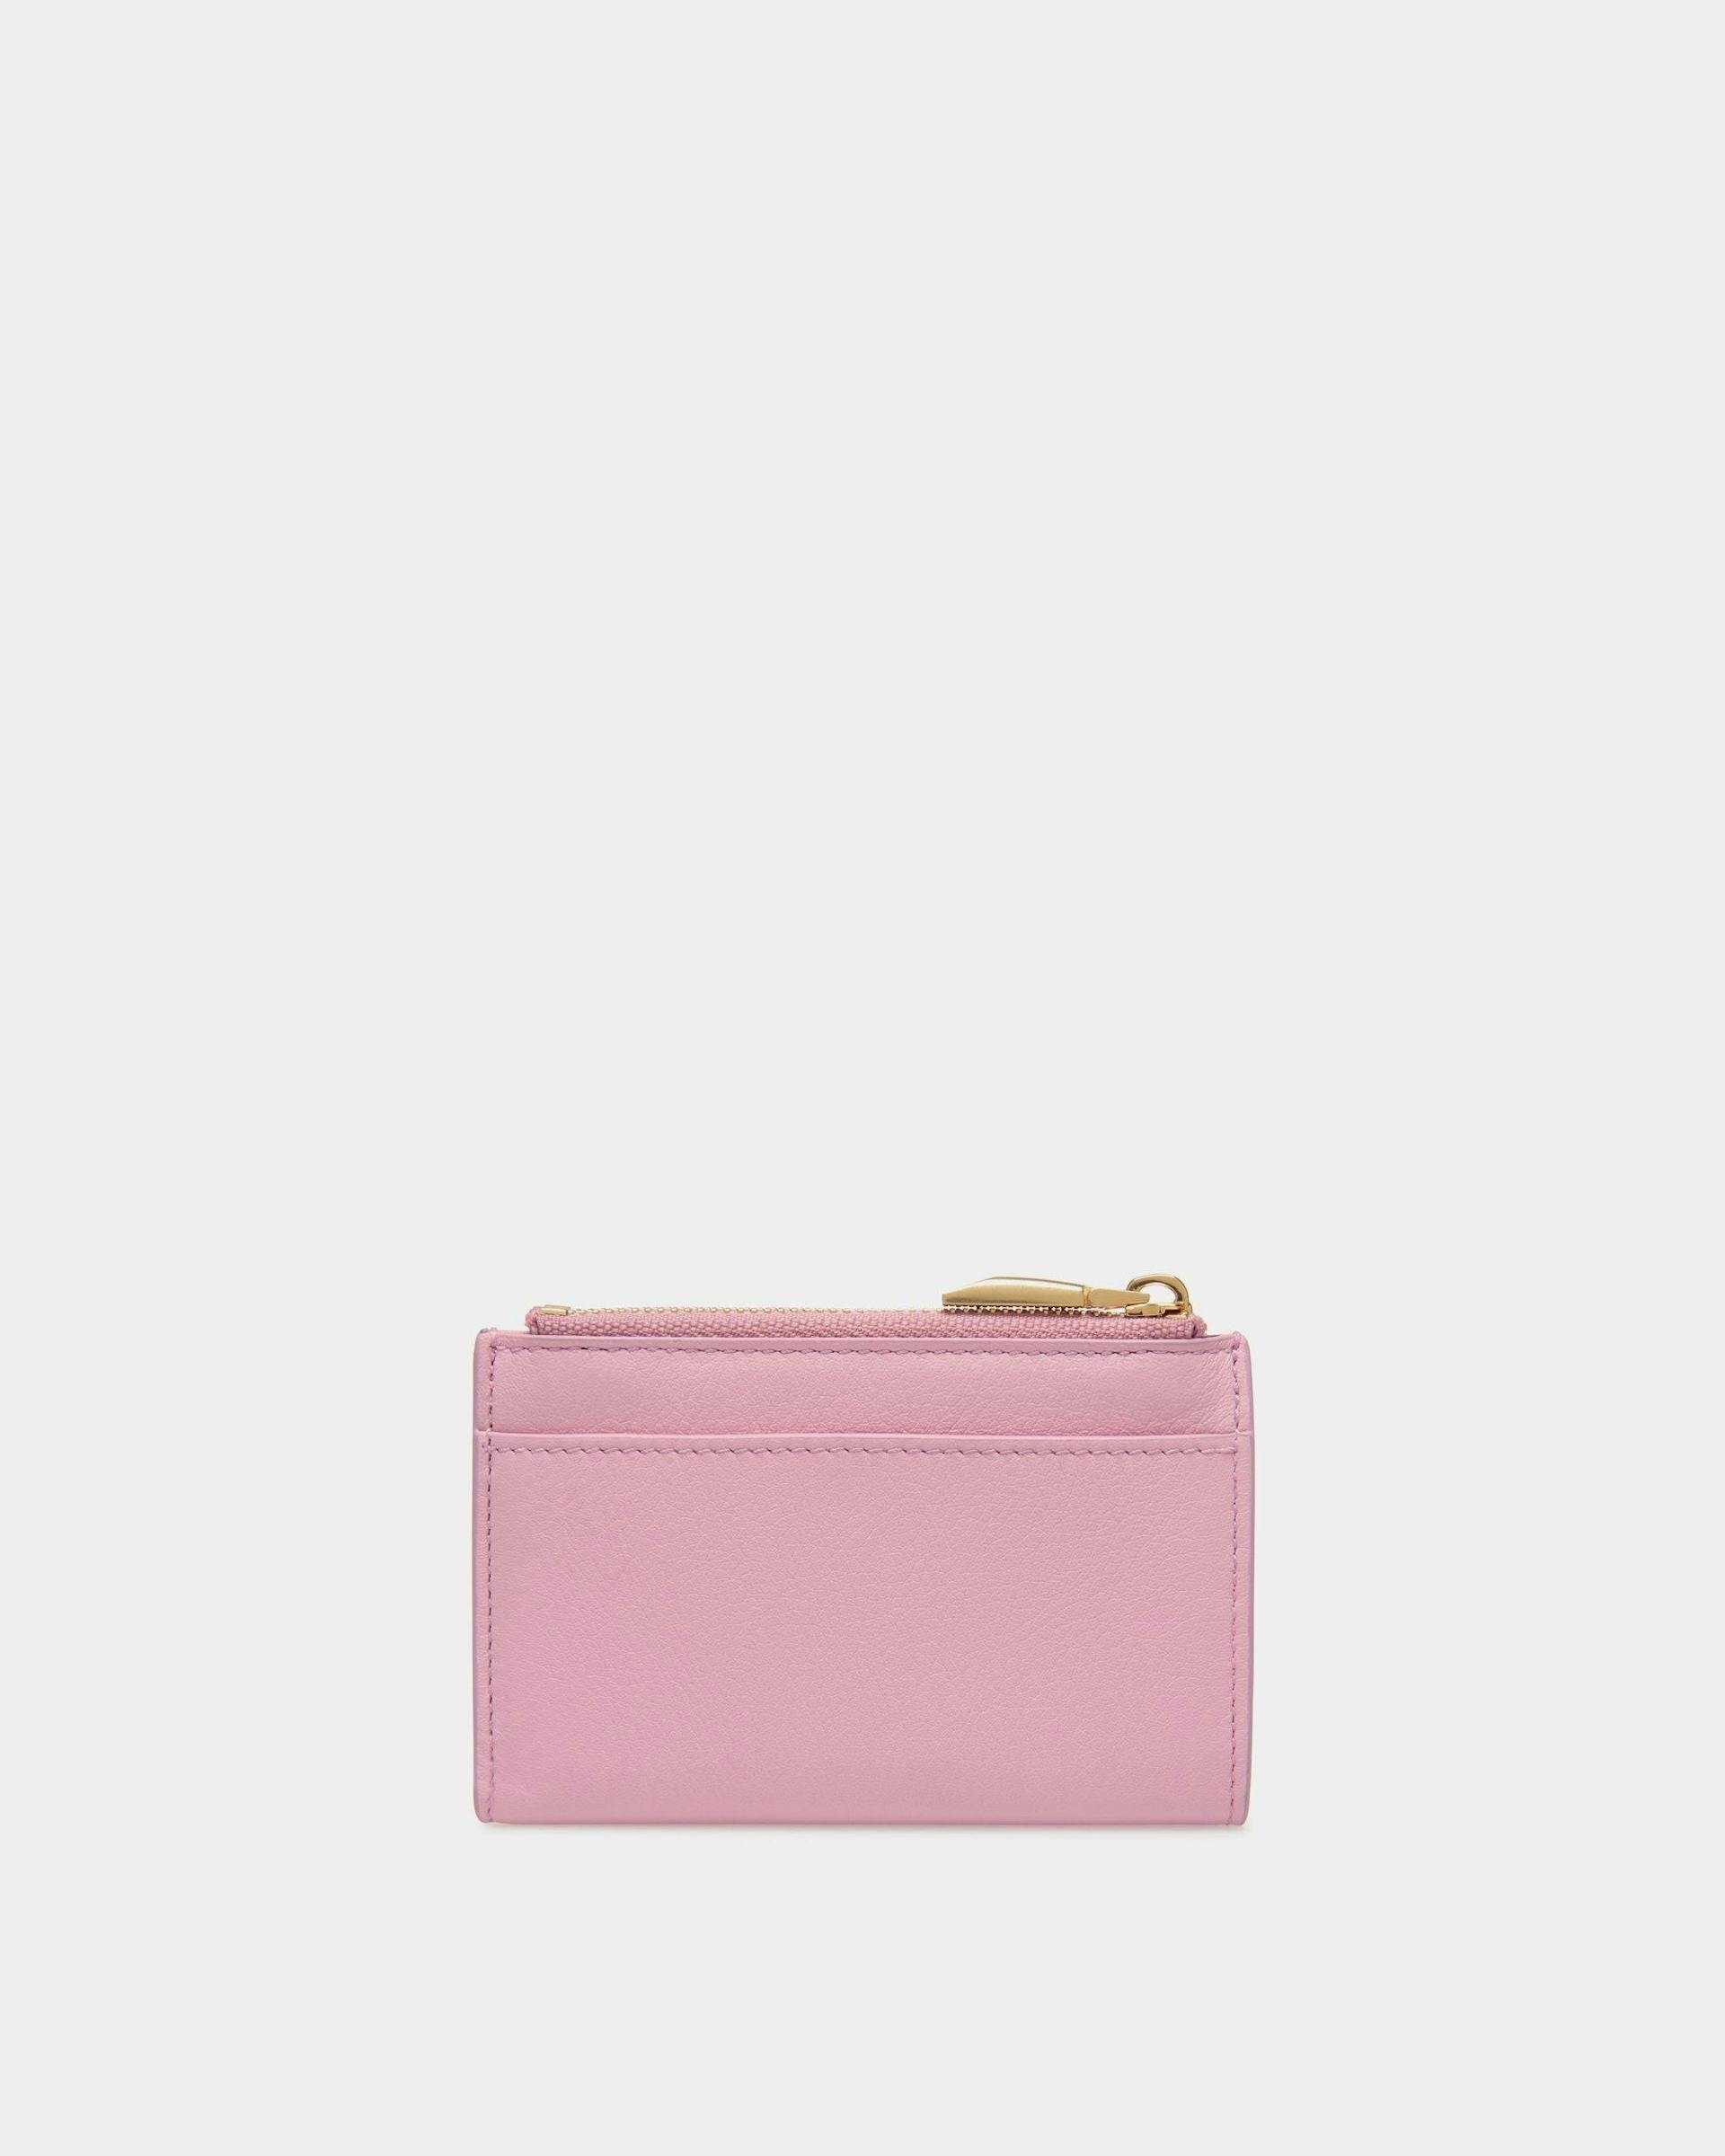 Women's Bally Spell Wallet in Pink Leather | Bally | Still Life Back